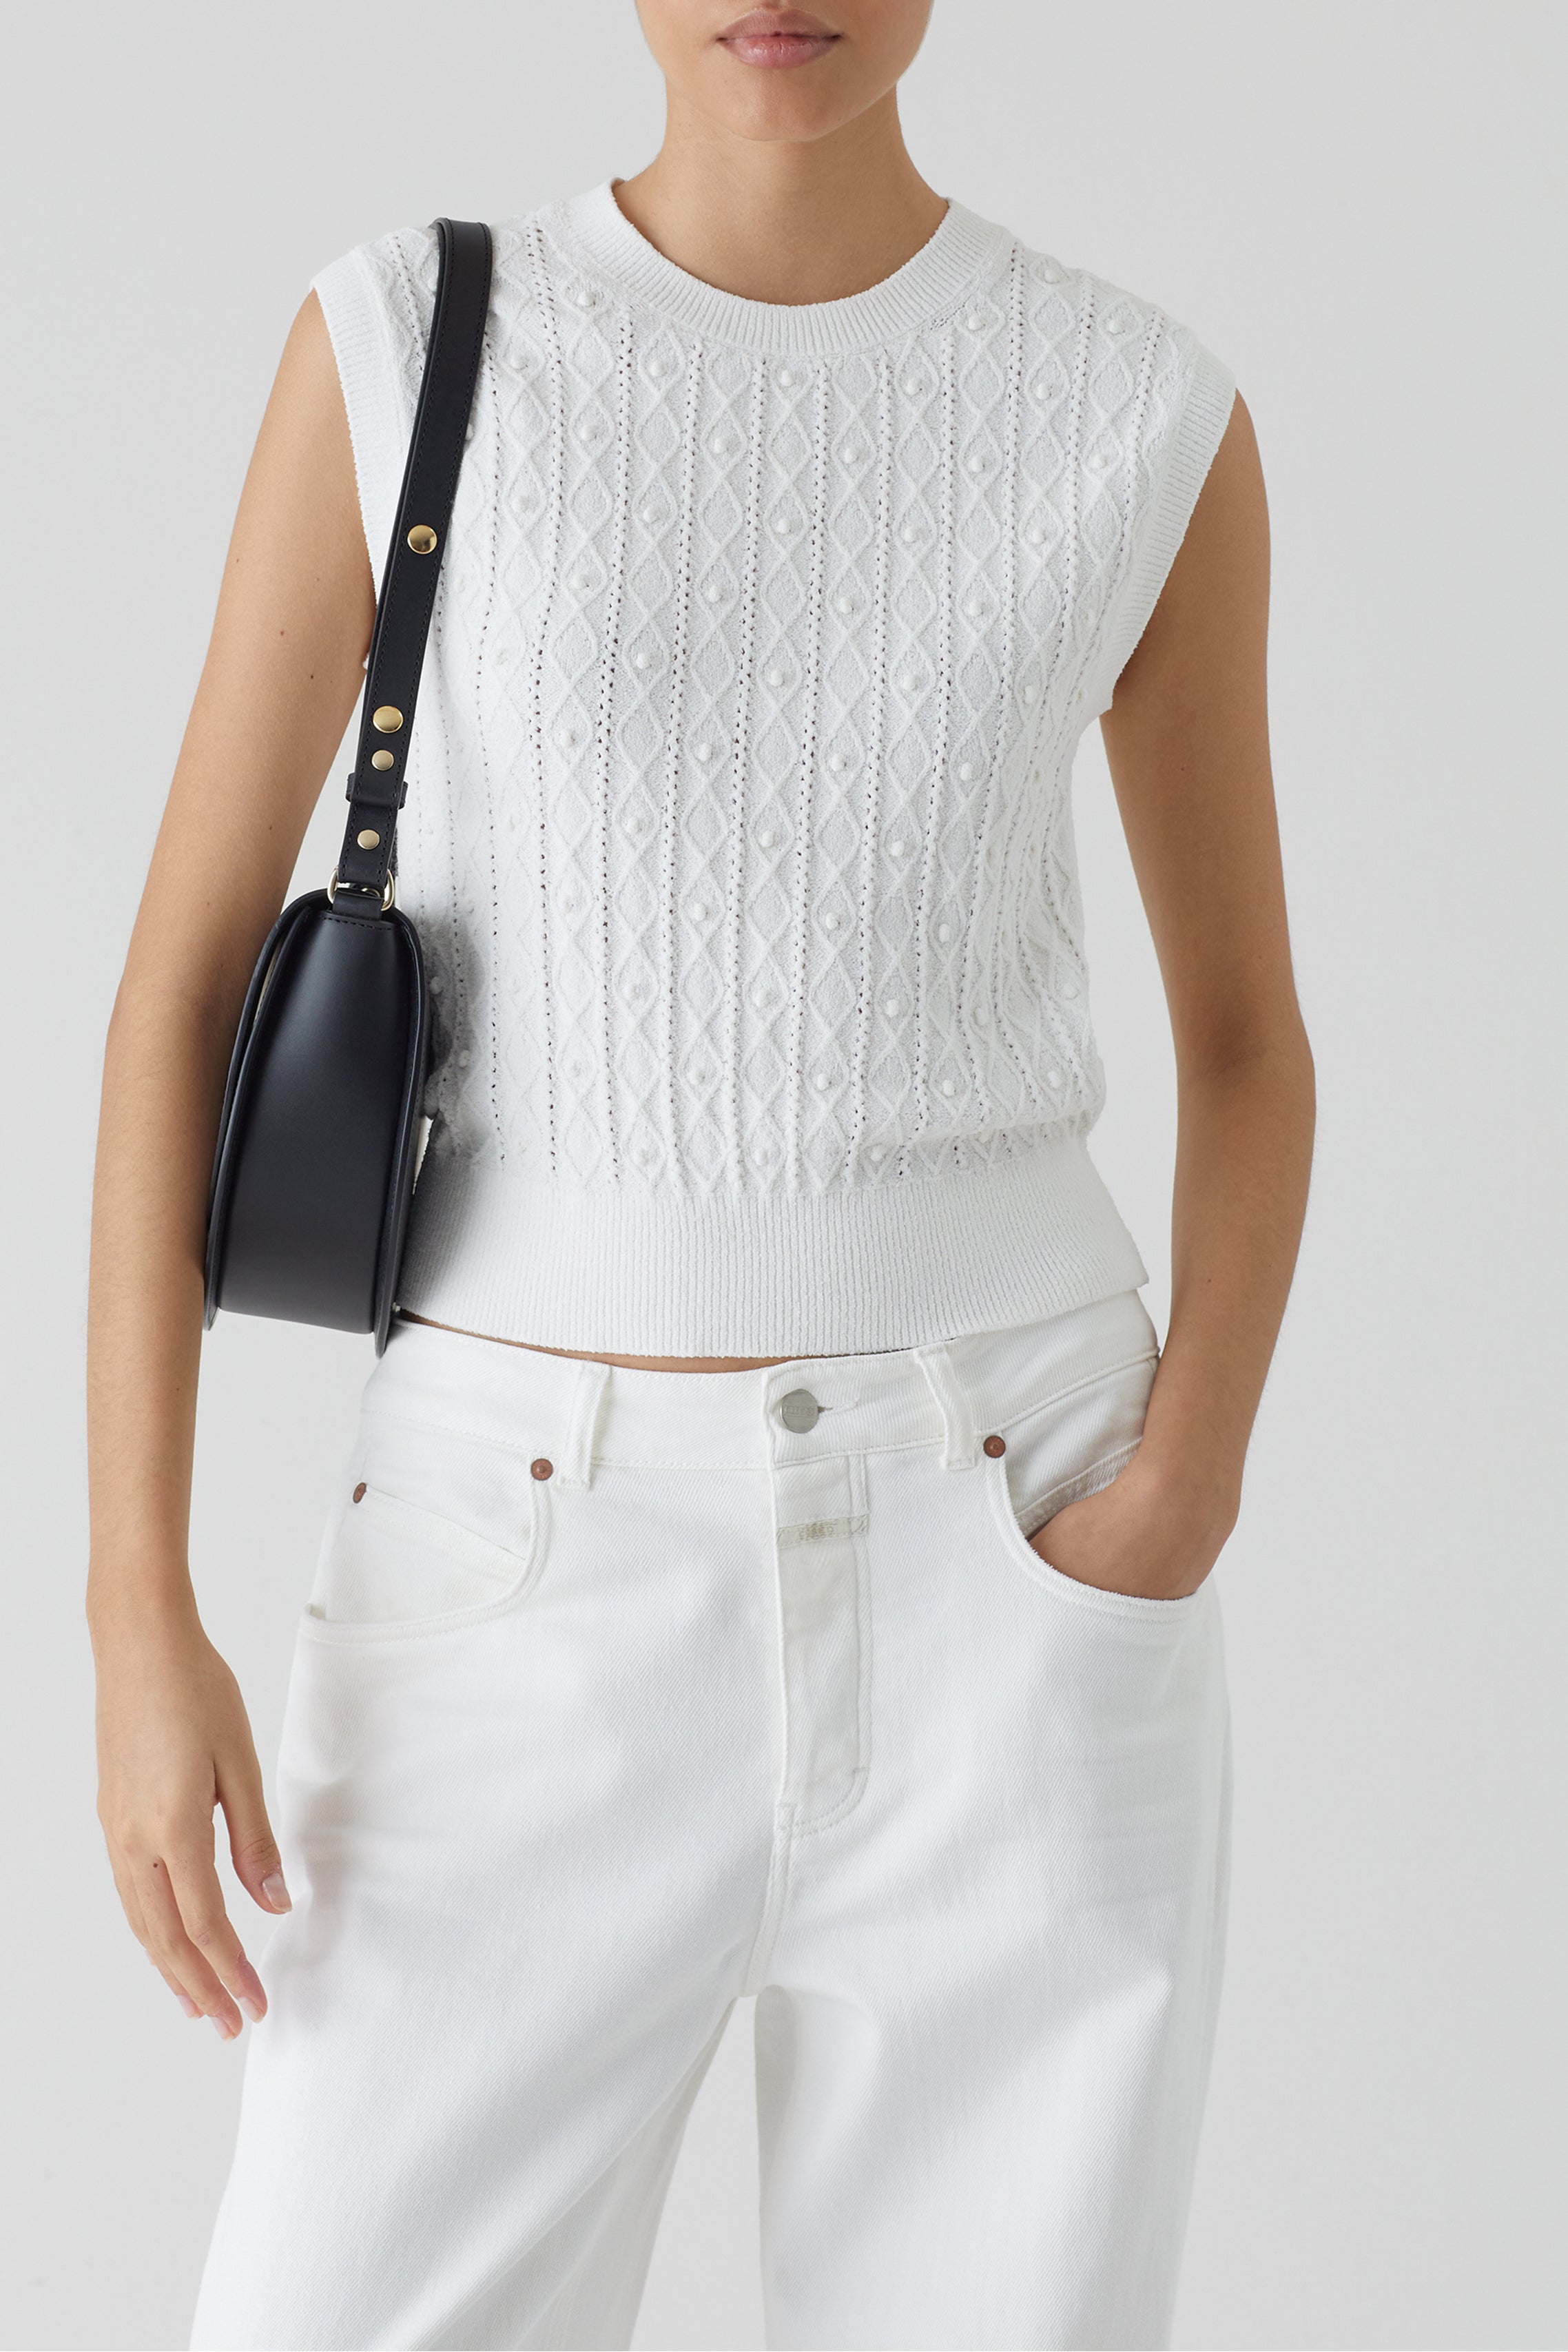 CLOSED-OUTLET-SALE-SLEEVELESS-KNIT-Strick-ARCHIVE-COLLECTION.jpg